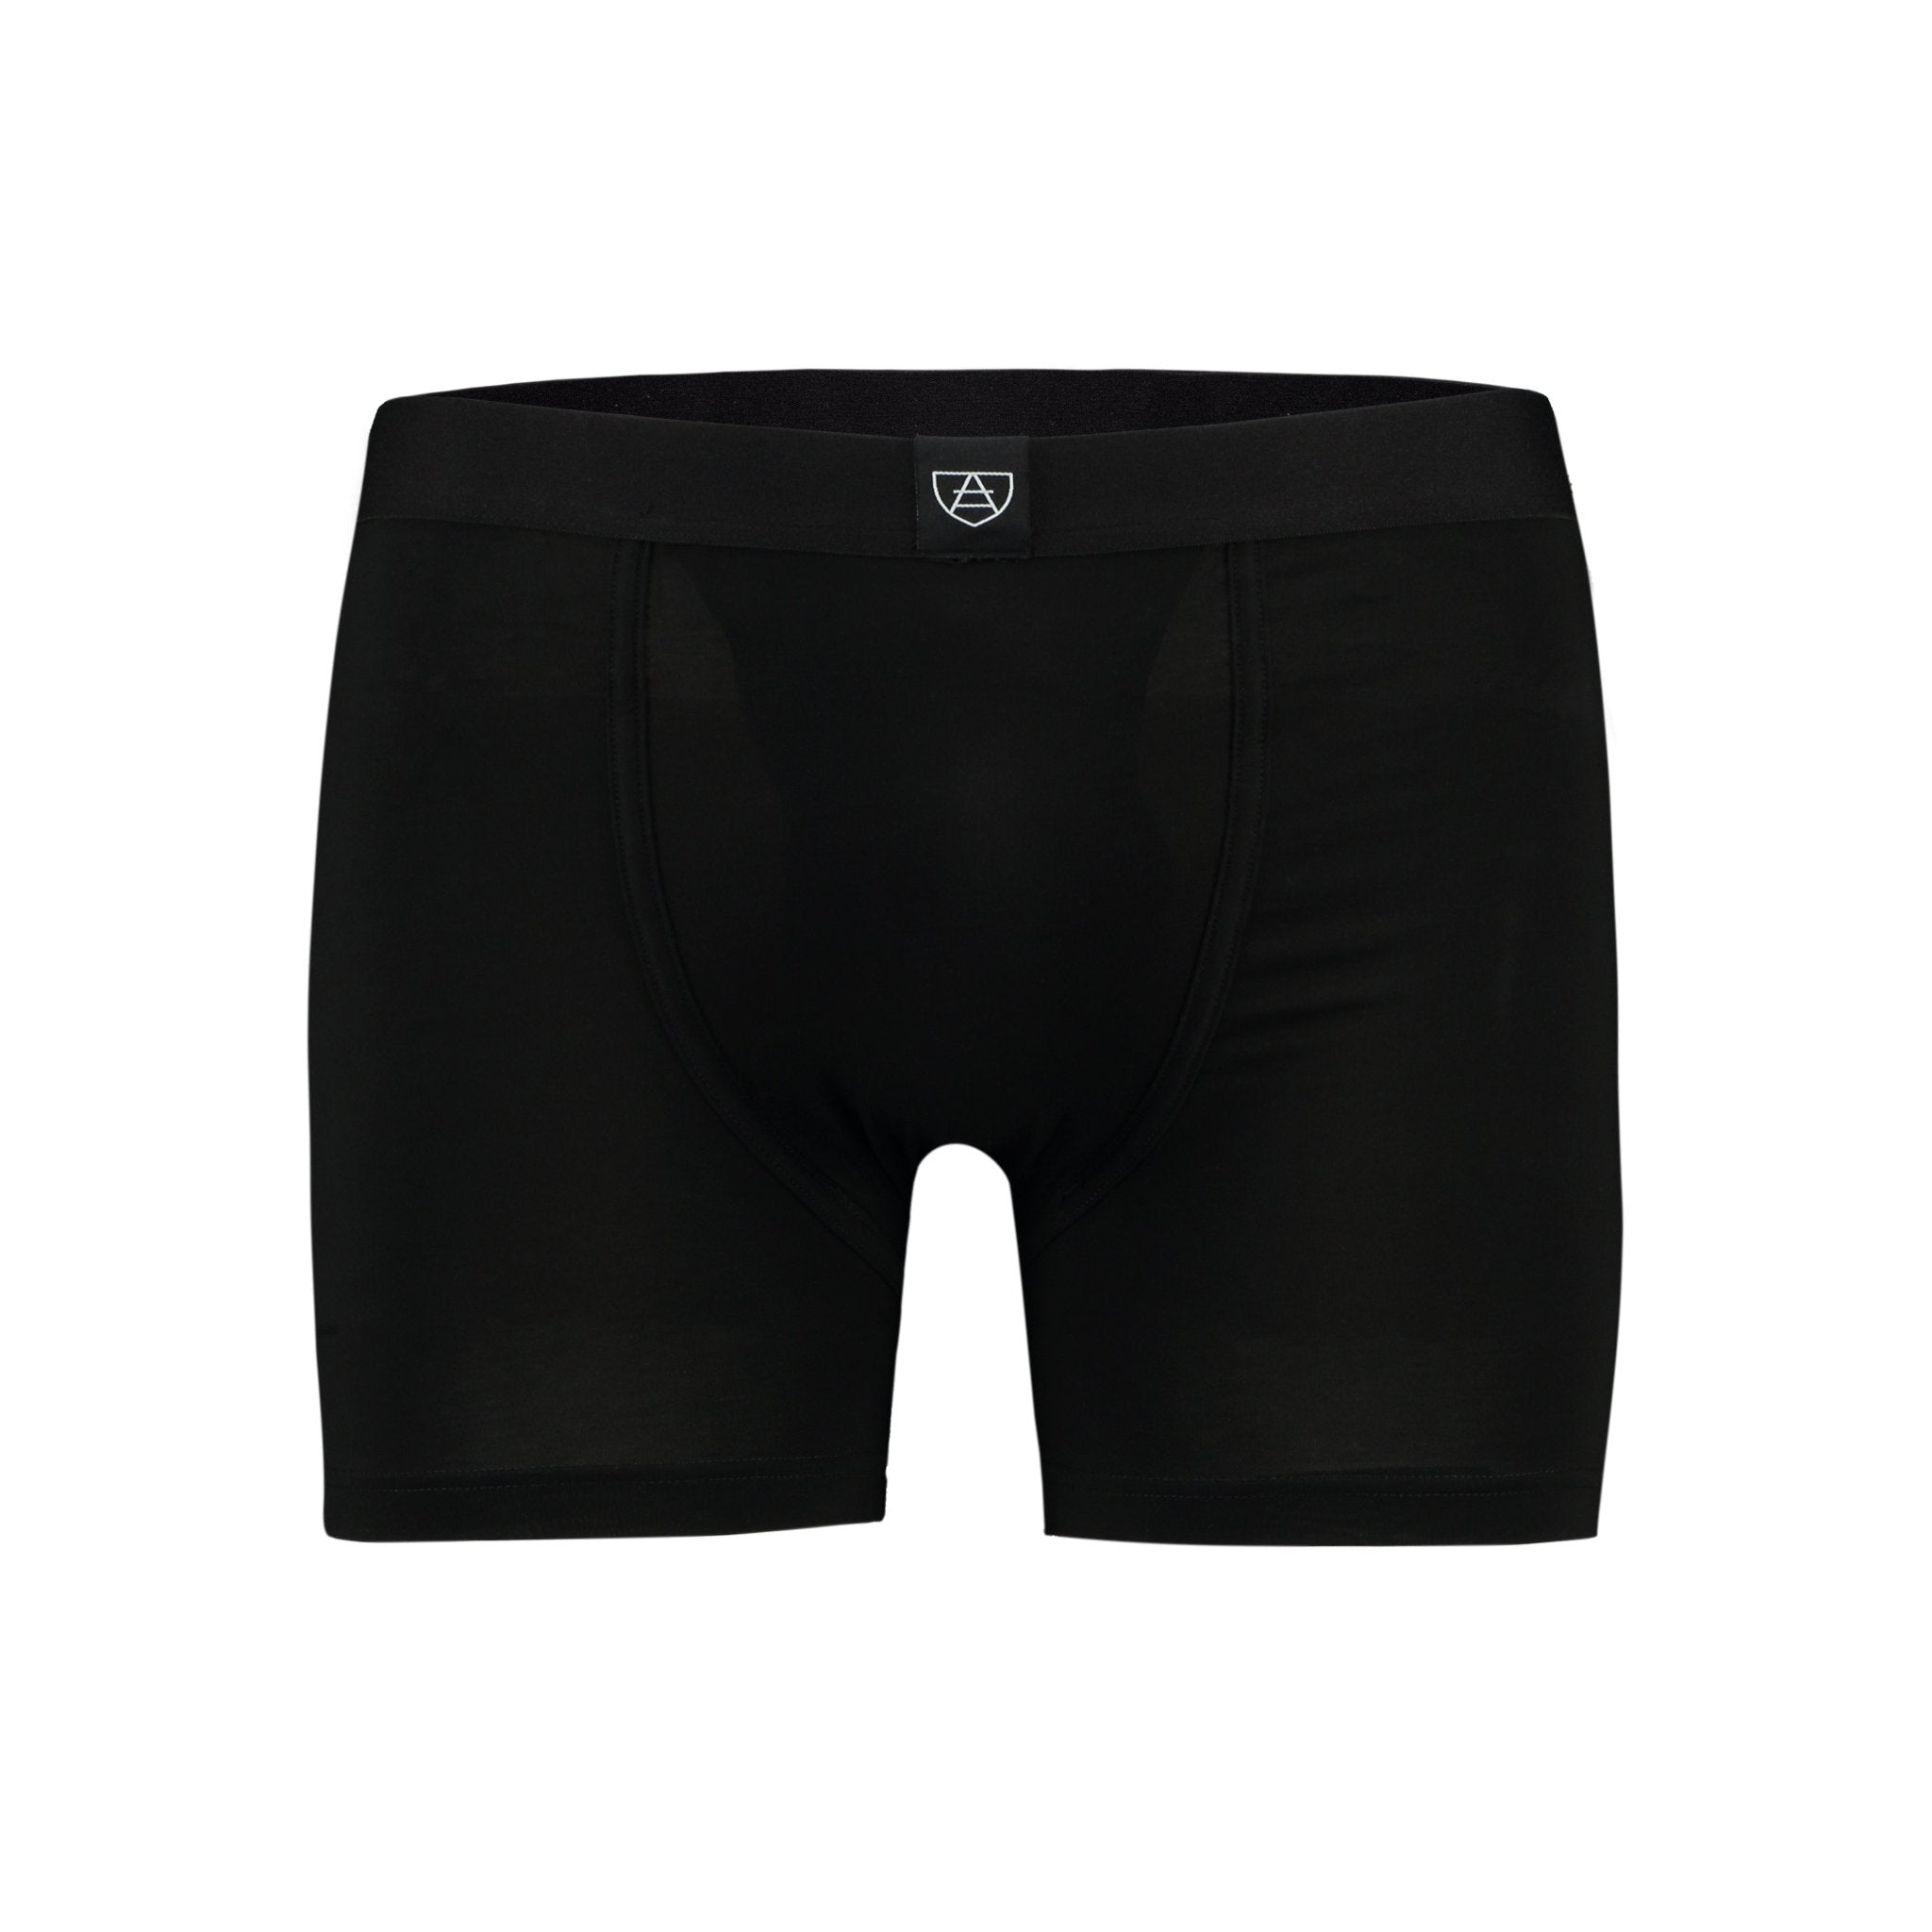 Black All-in-One Packing Boxers